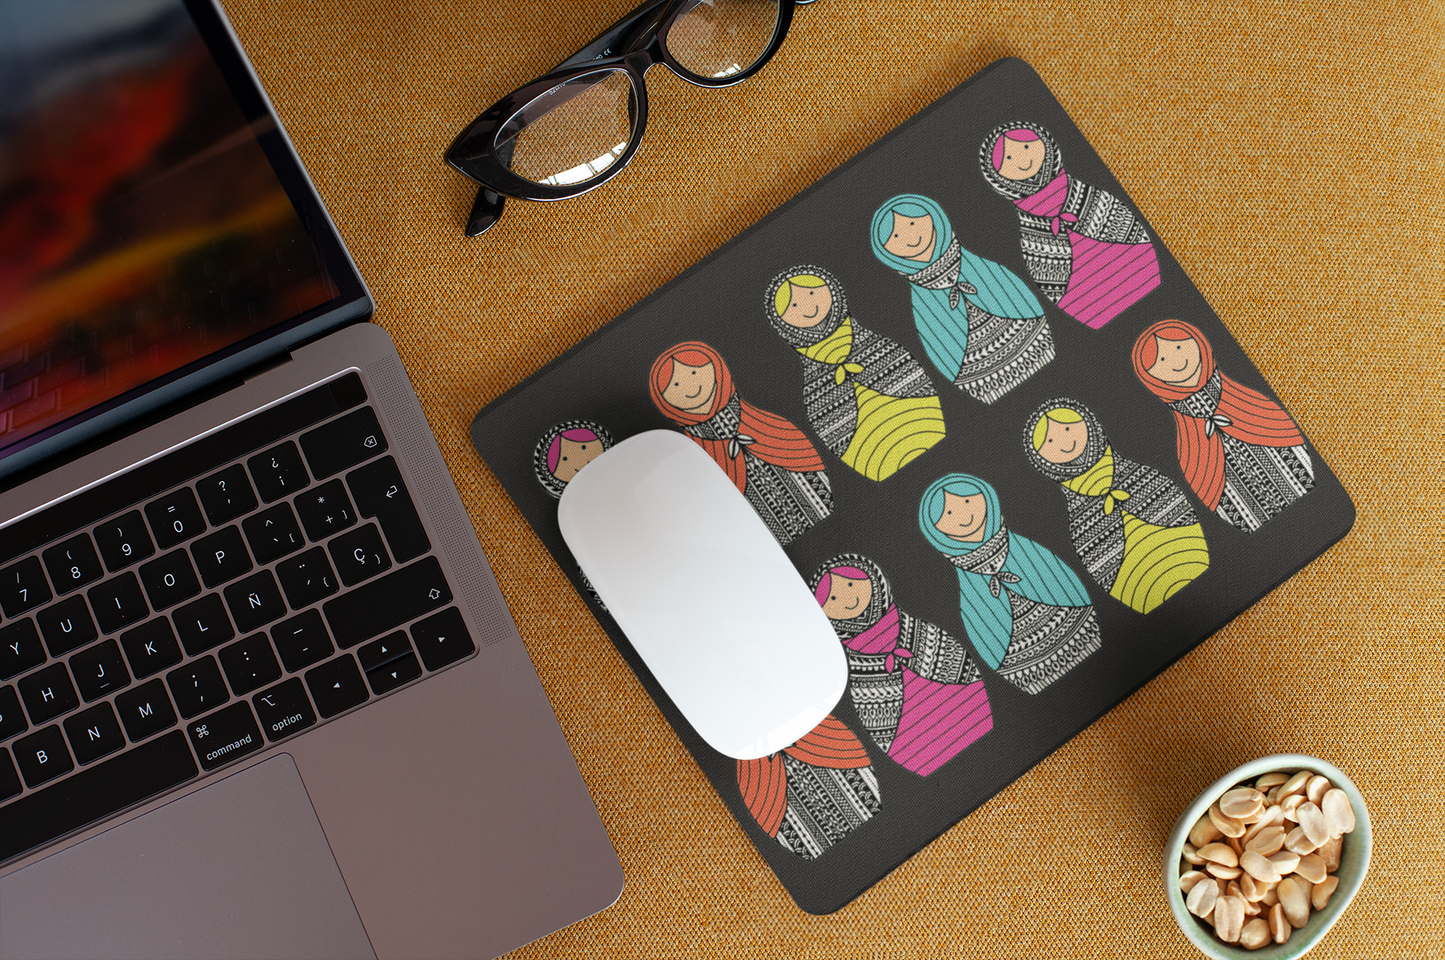 Russian Dolls Black Mouse Pad